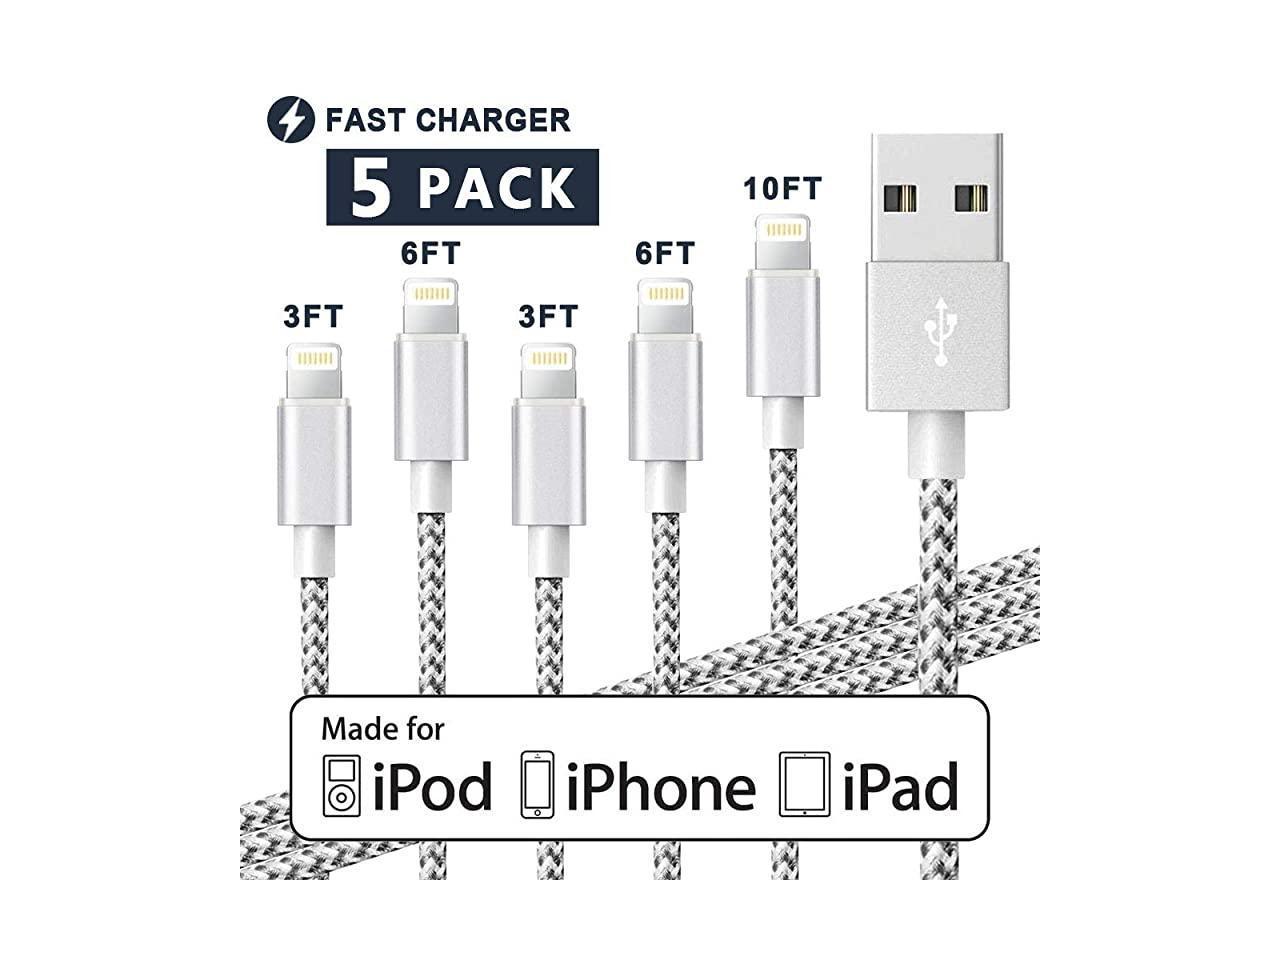 5 Pack iPhone Charger USB Charging Cord Nylon Braided Lightning Cable with Length 3FT/6FT/10FT for iPhone Xs/XS MAX/XR/X/8 Plus/8/7 Plus/7/6S Plus/6/5S/5E/5 